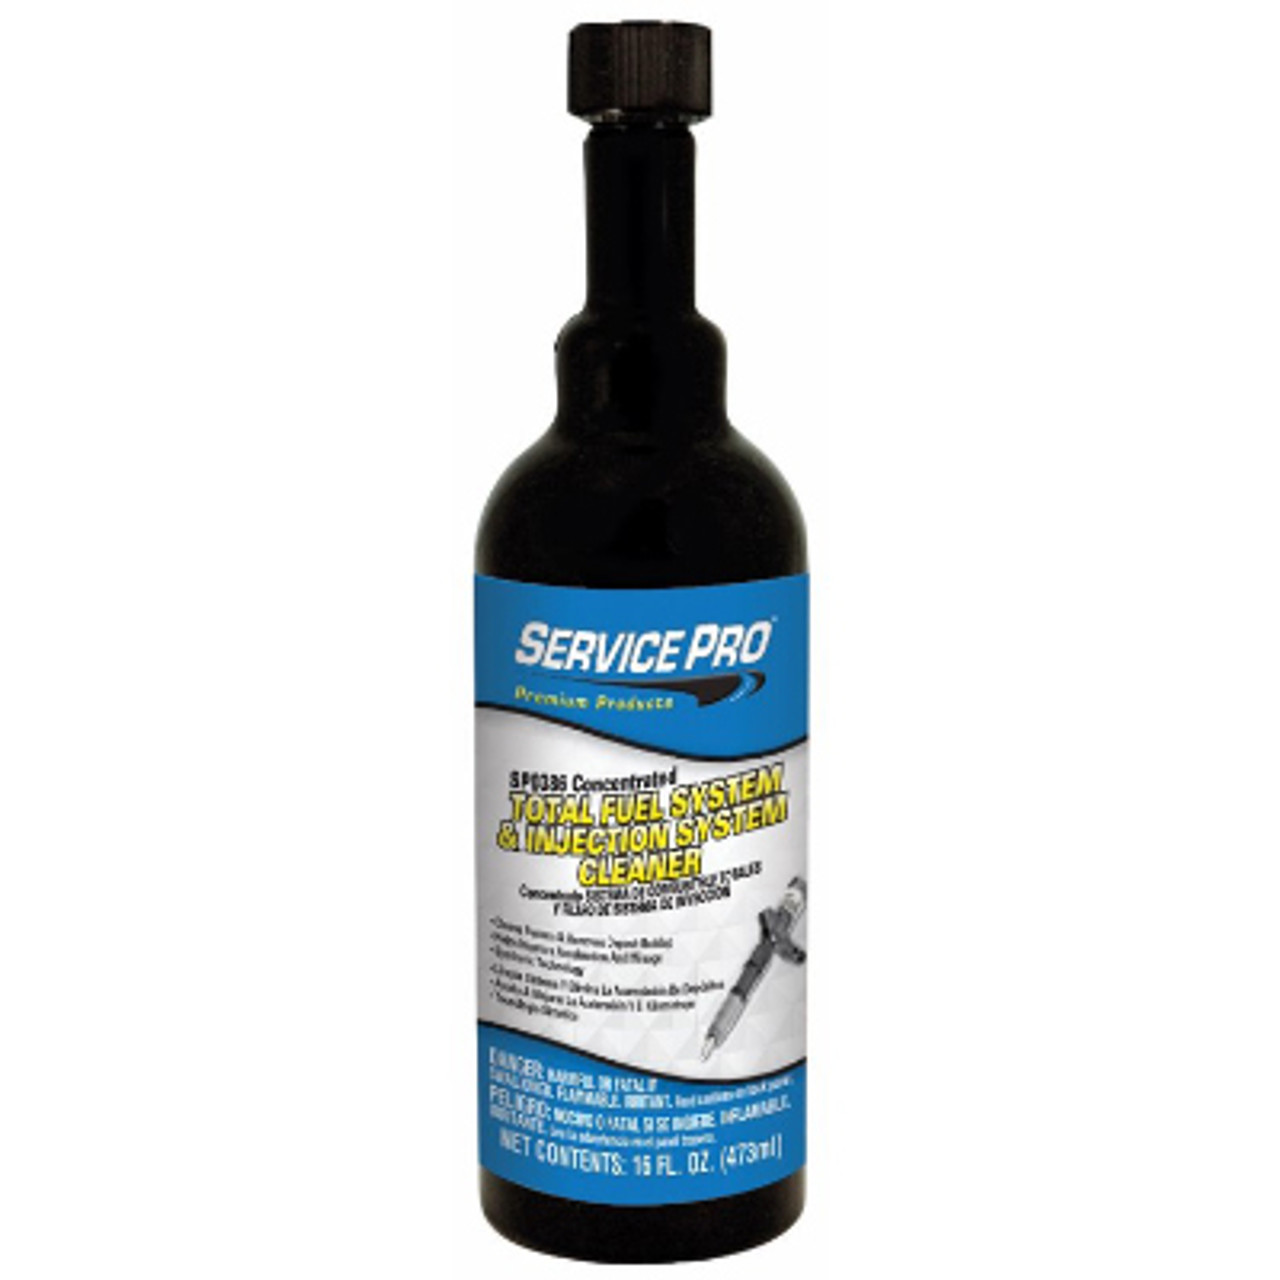 Concentrated Injector Cleaner Petrol - 500ml